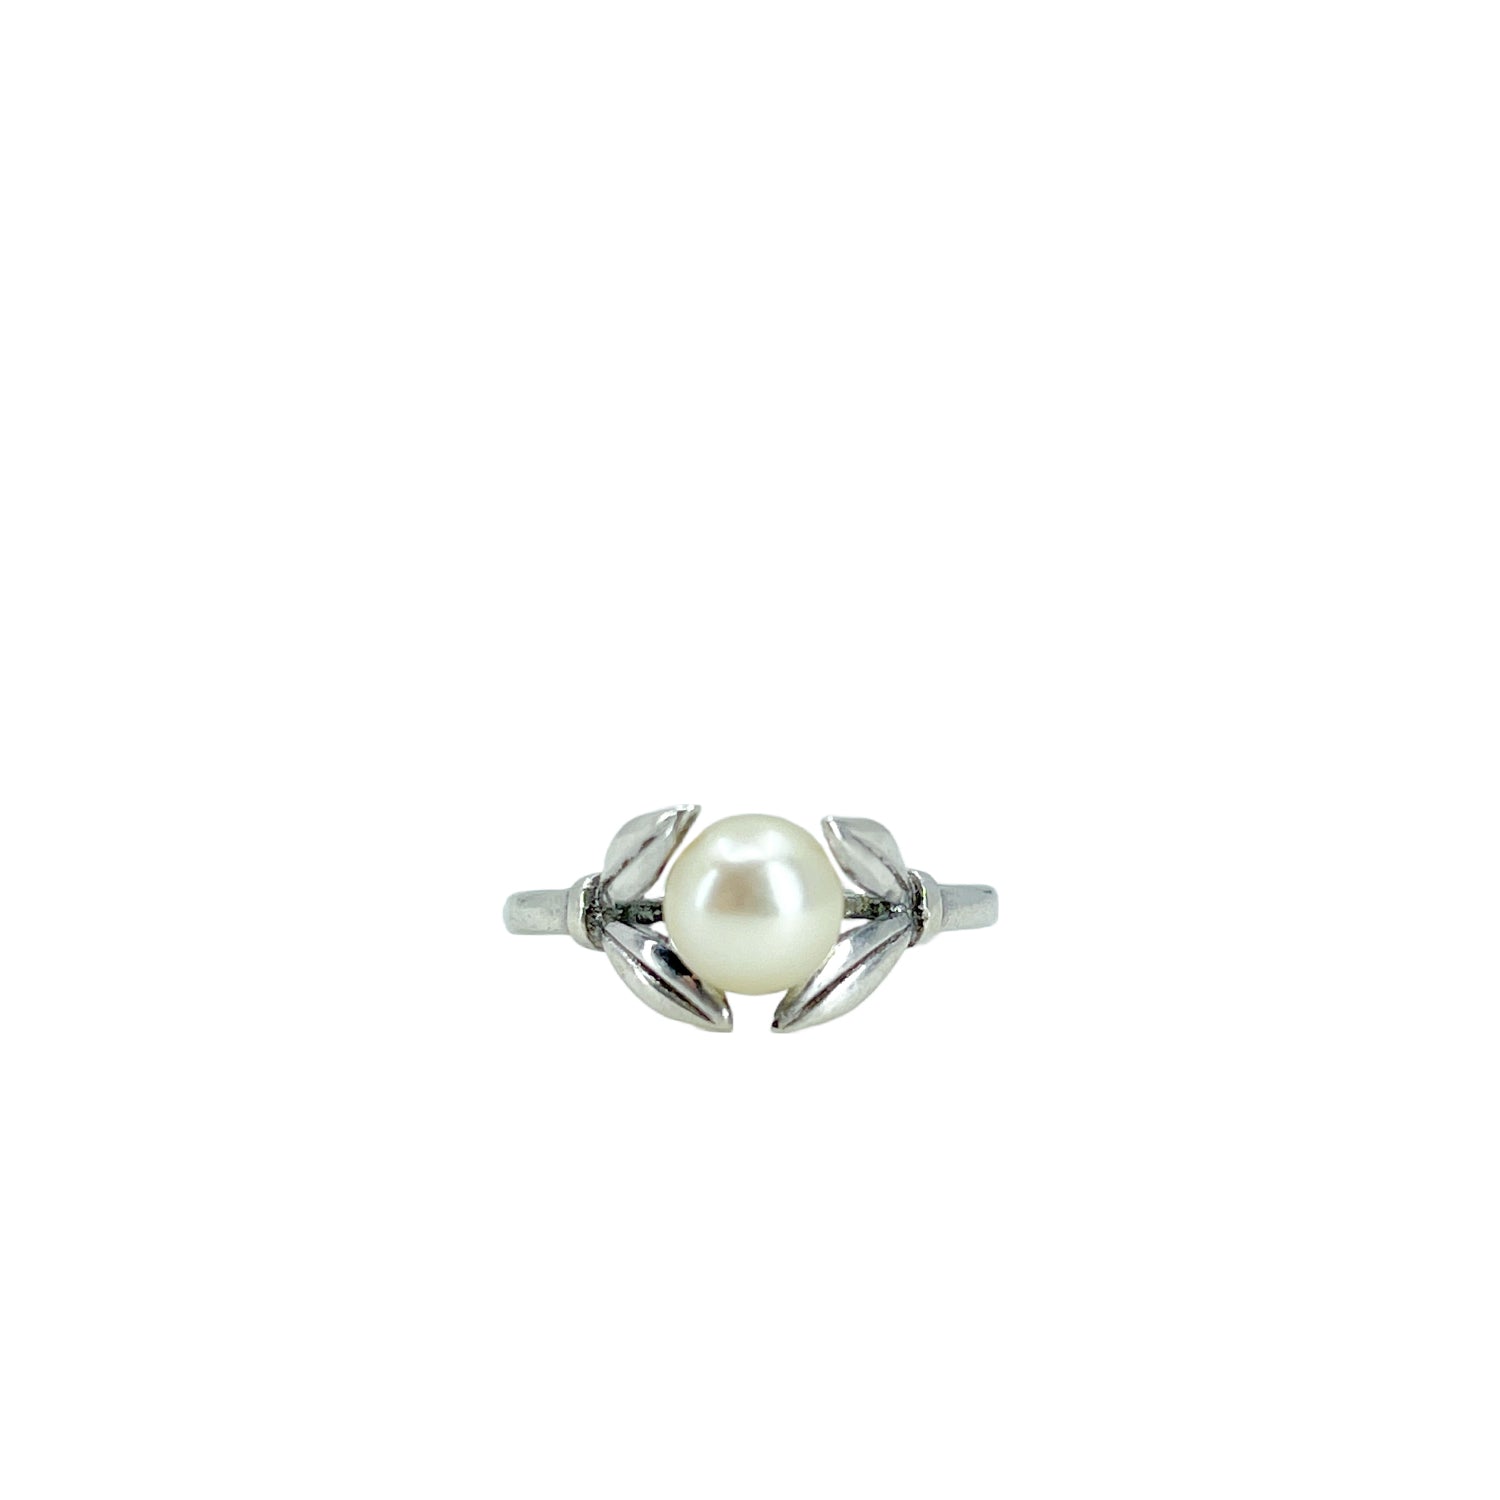 Mikimoto Vintage Leaf Solitaire Japanese Saltwater Akoya Cultured Pearl Ring- Sterling Silver Sz 6